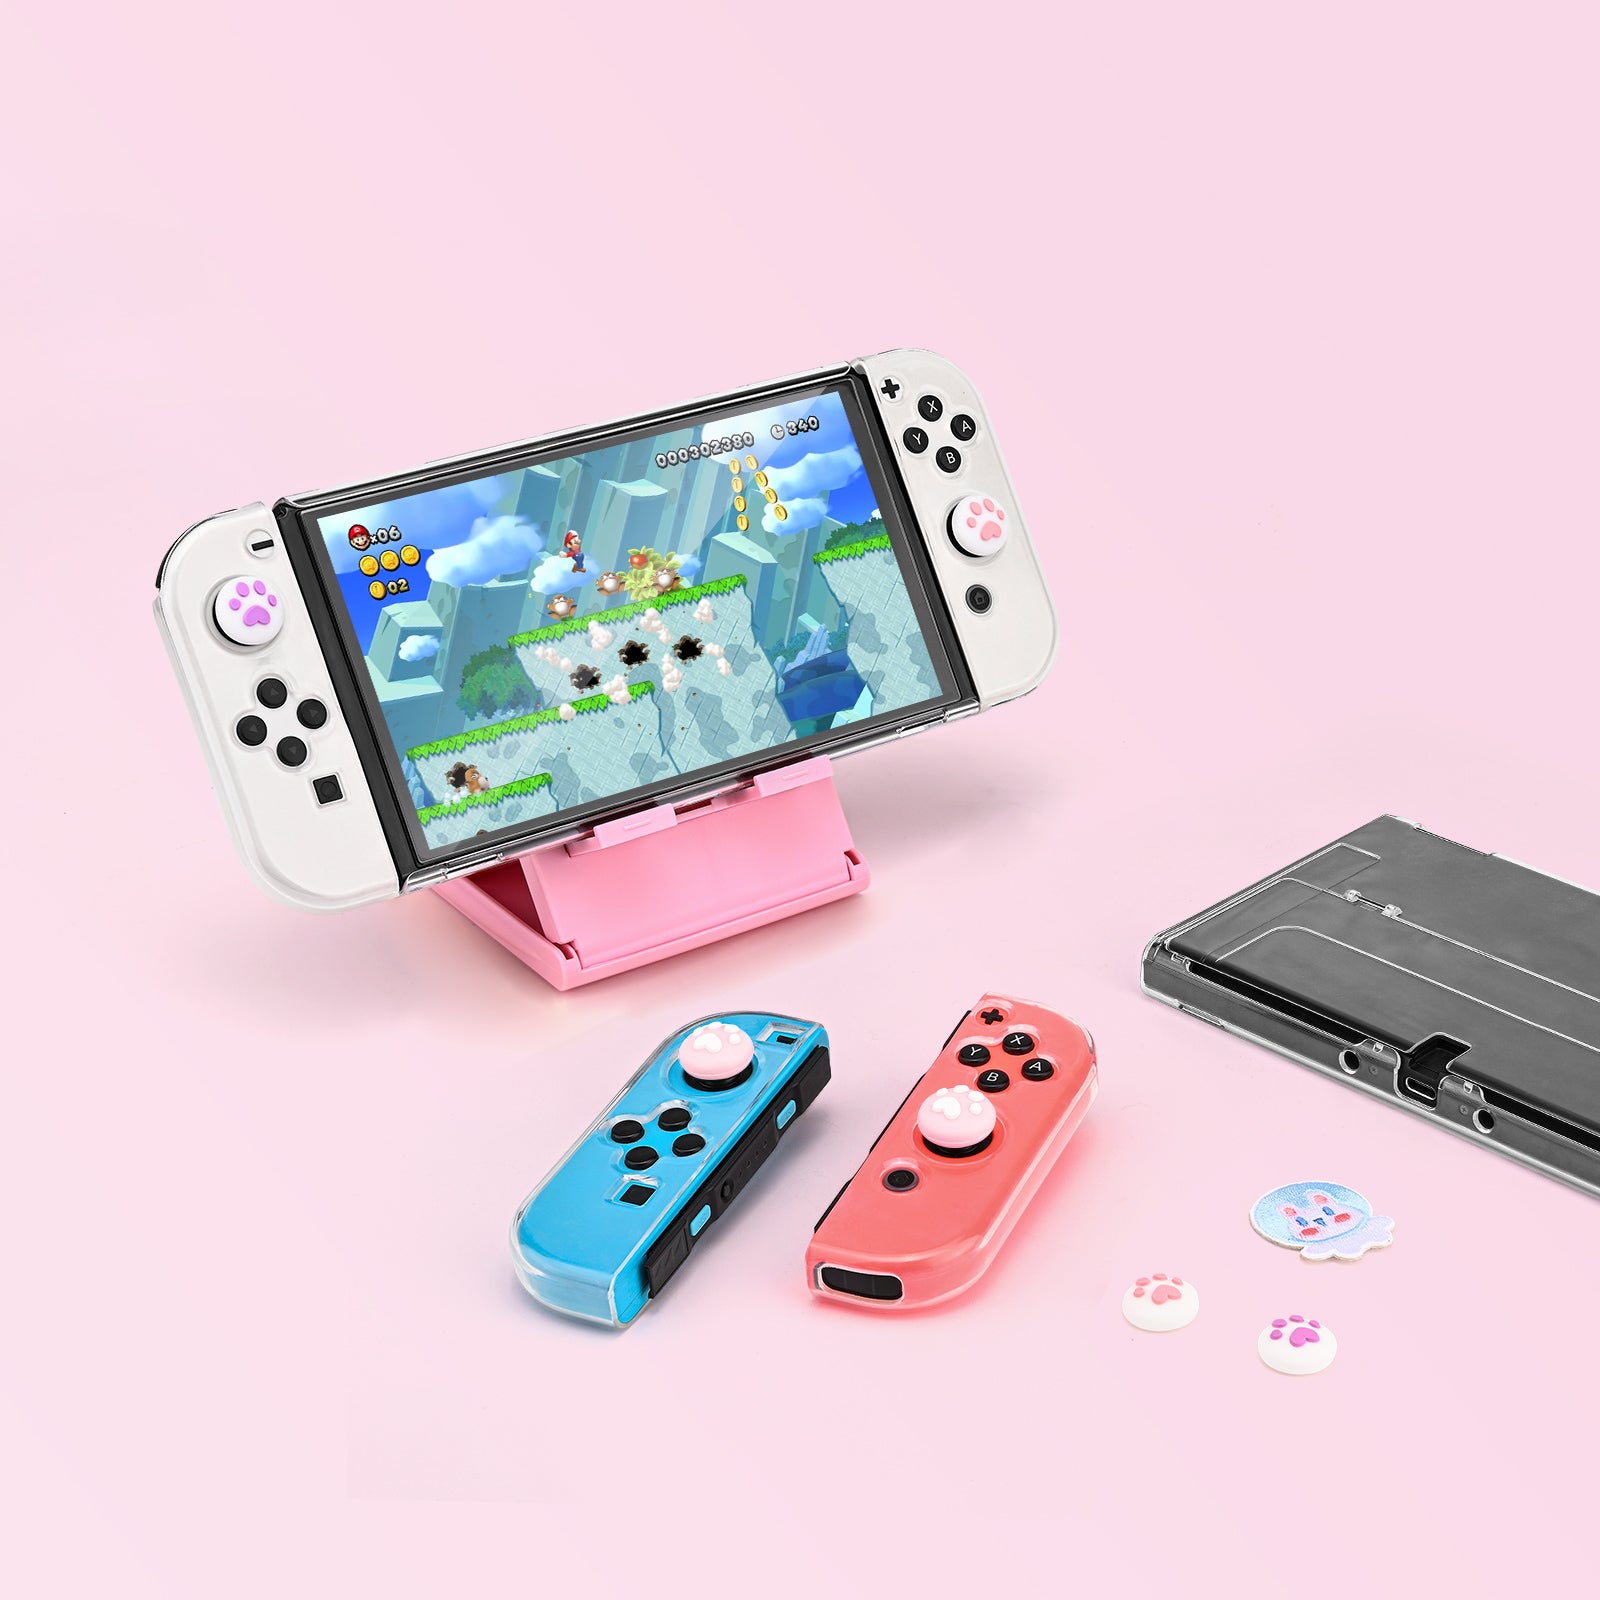 Younik Nintendo Switch OLED Travel Case, OLED Switch Grip Kawaii Cute Gift for Kids